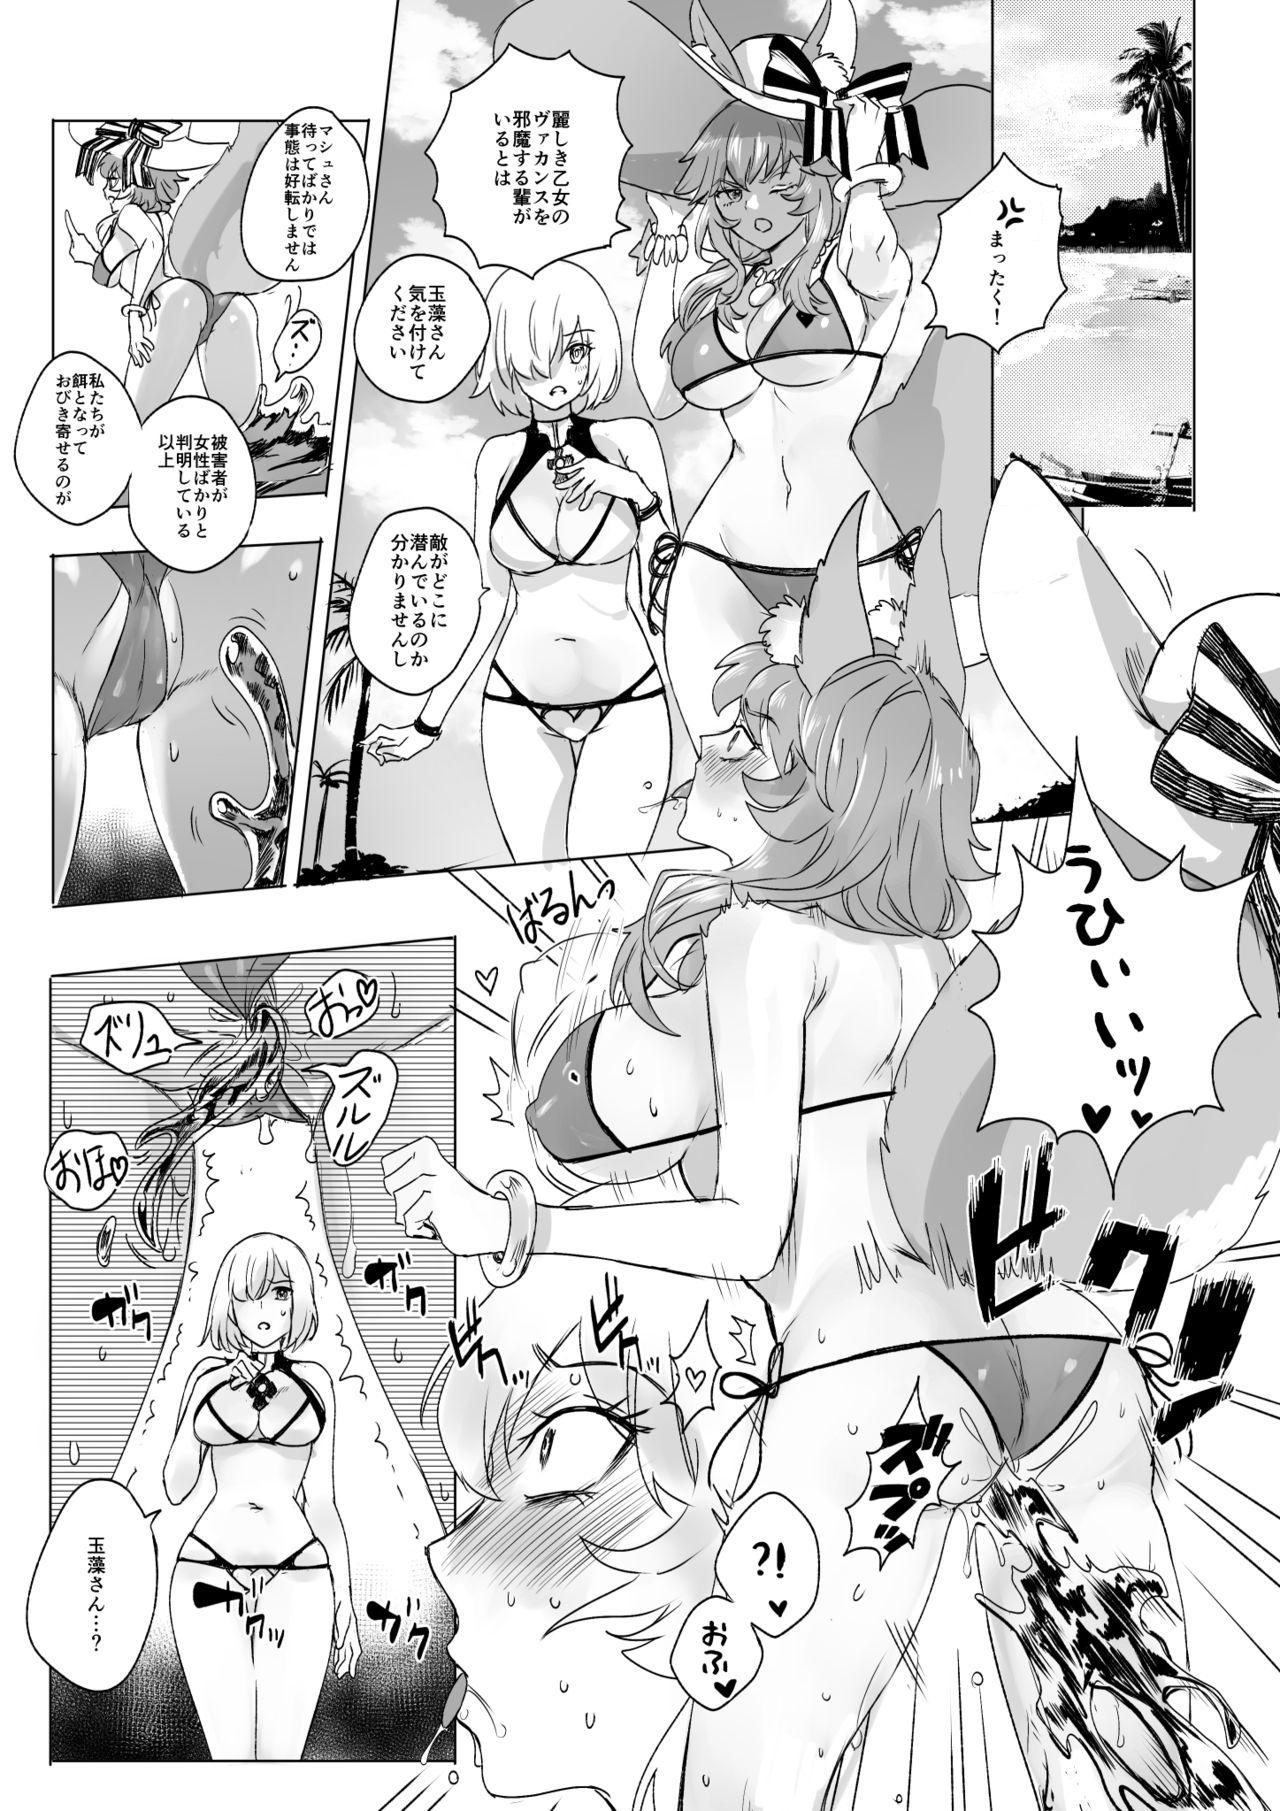 Pegging 水着玉藻の前&マシュ憑依 - Fate grand order Anal - Picture 1